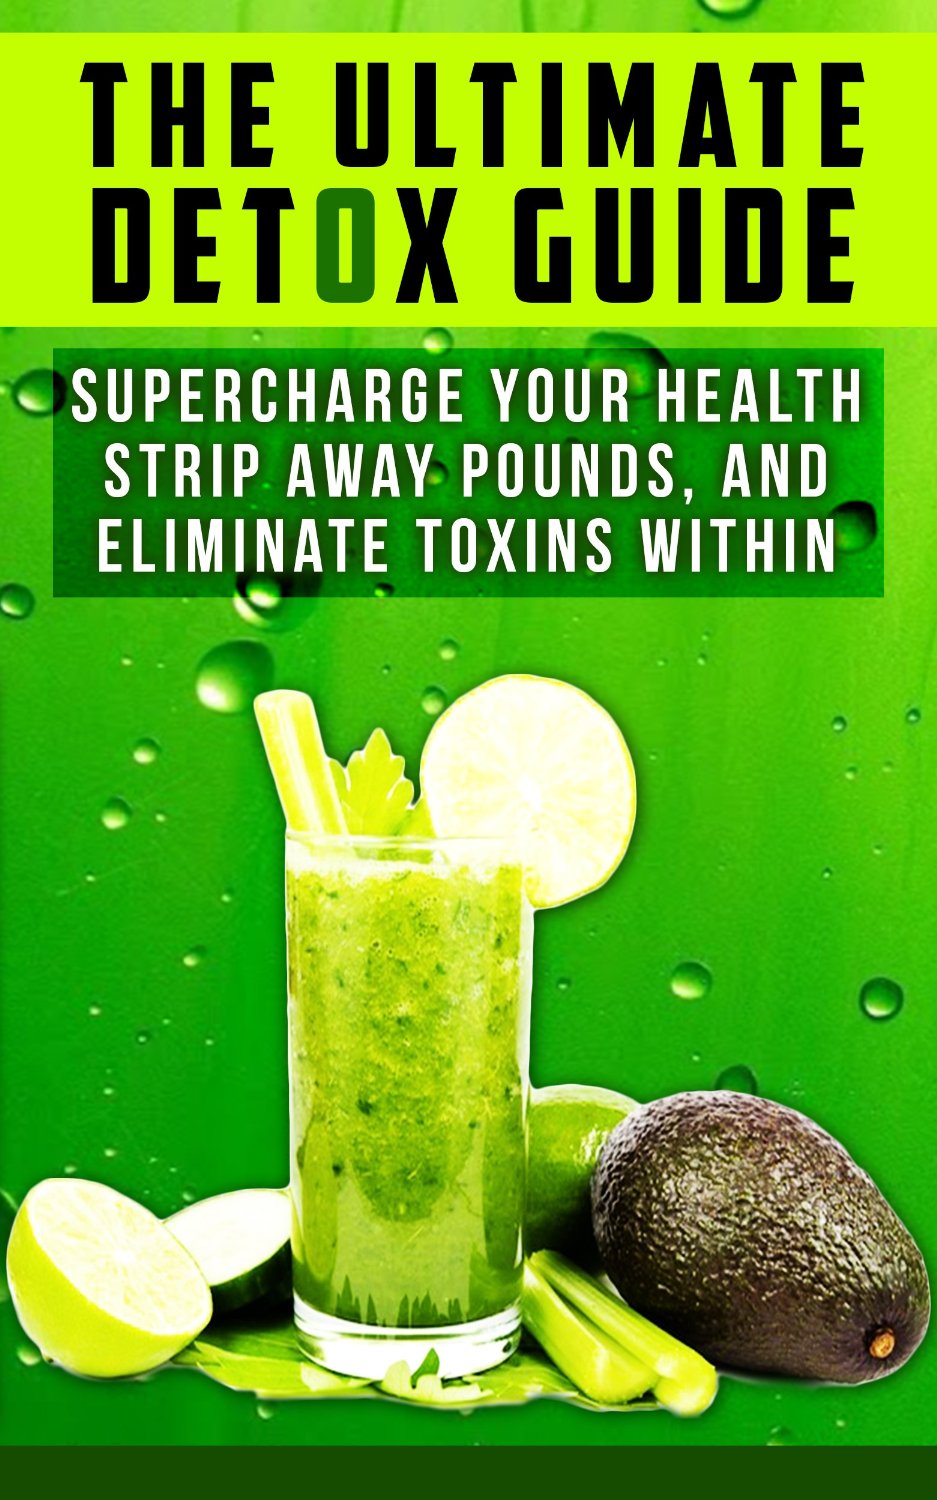 The Ultimate Detox Guide: Supercharge Your Health, Strip Away Pounds, And Eliminate Toxins Within by Dr. David Lee